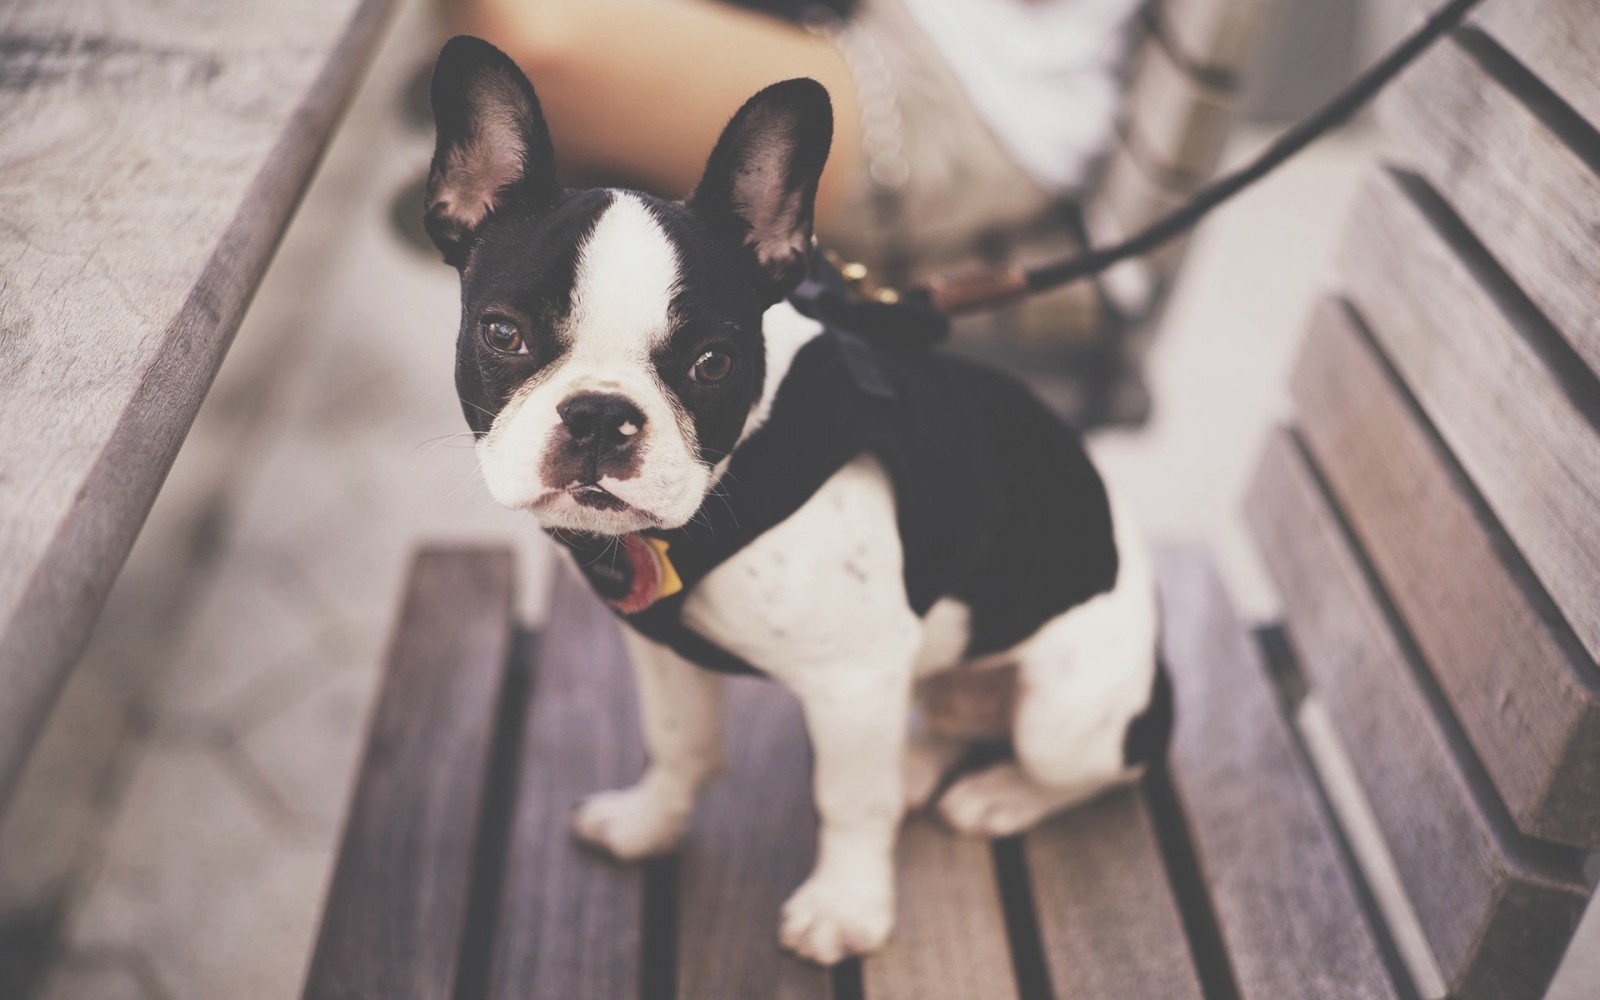 【Boston Terrier 】 History, photos and more 【2020】